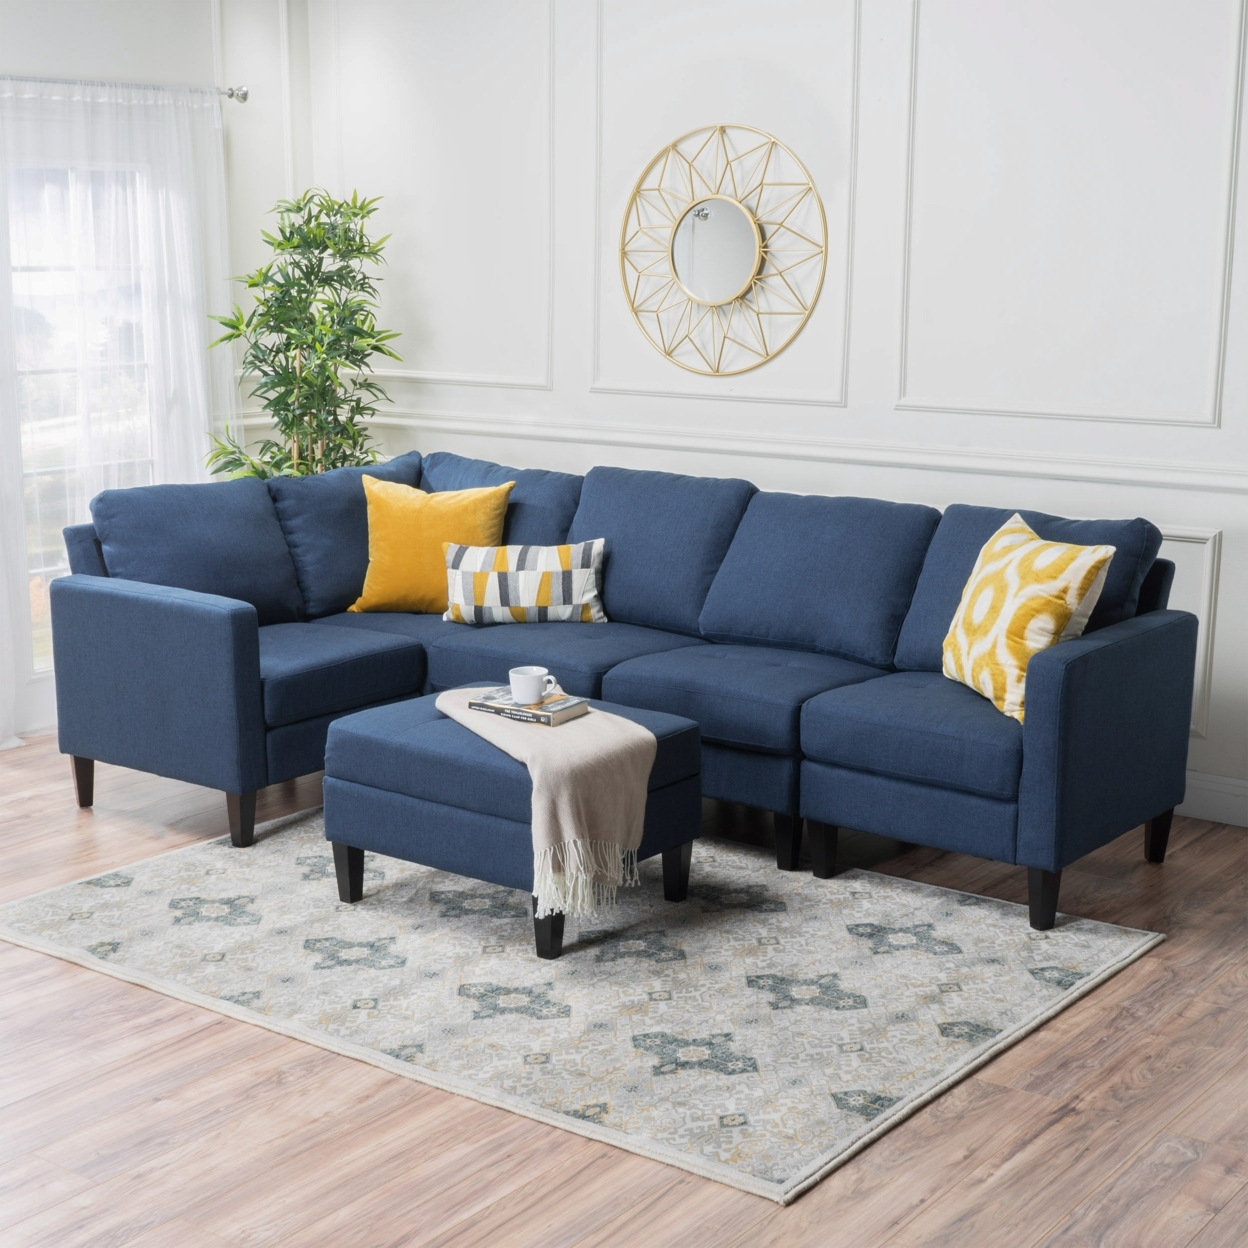 Bridger Fabric Sectional Couch With Ottoman - Deep Blue